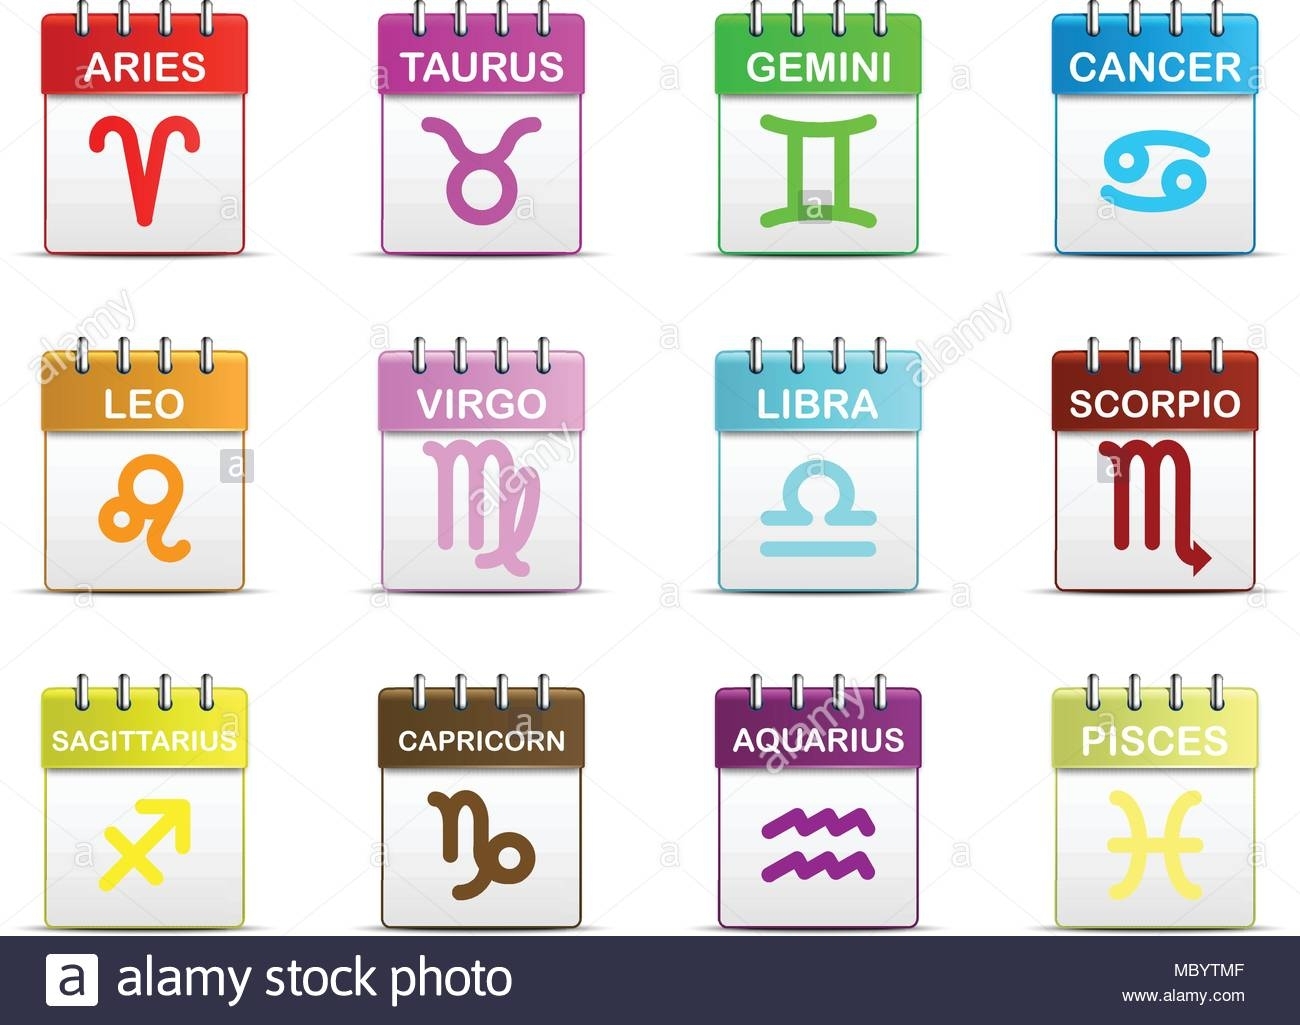 Colorful Tear Off Calendar With Zodiac Sign Symbol Icon For